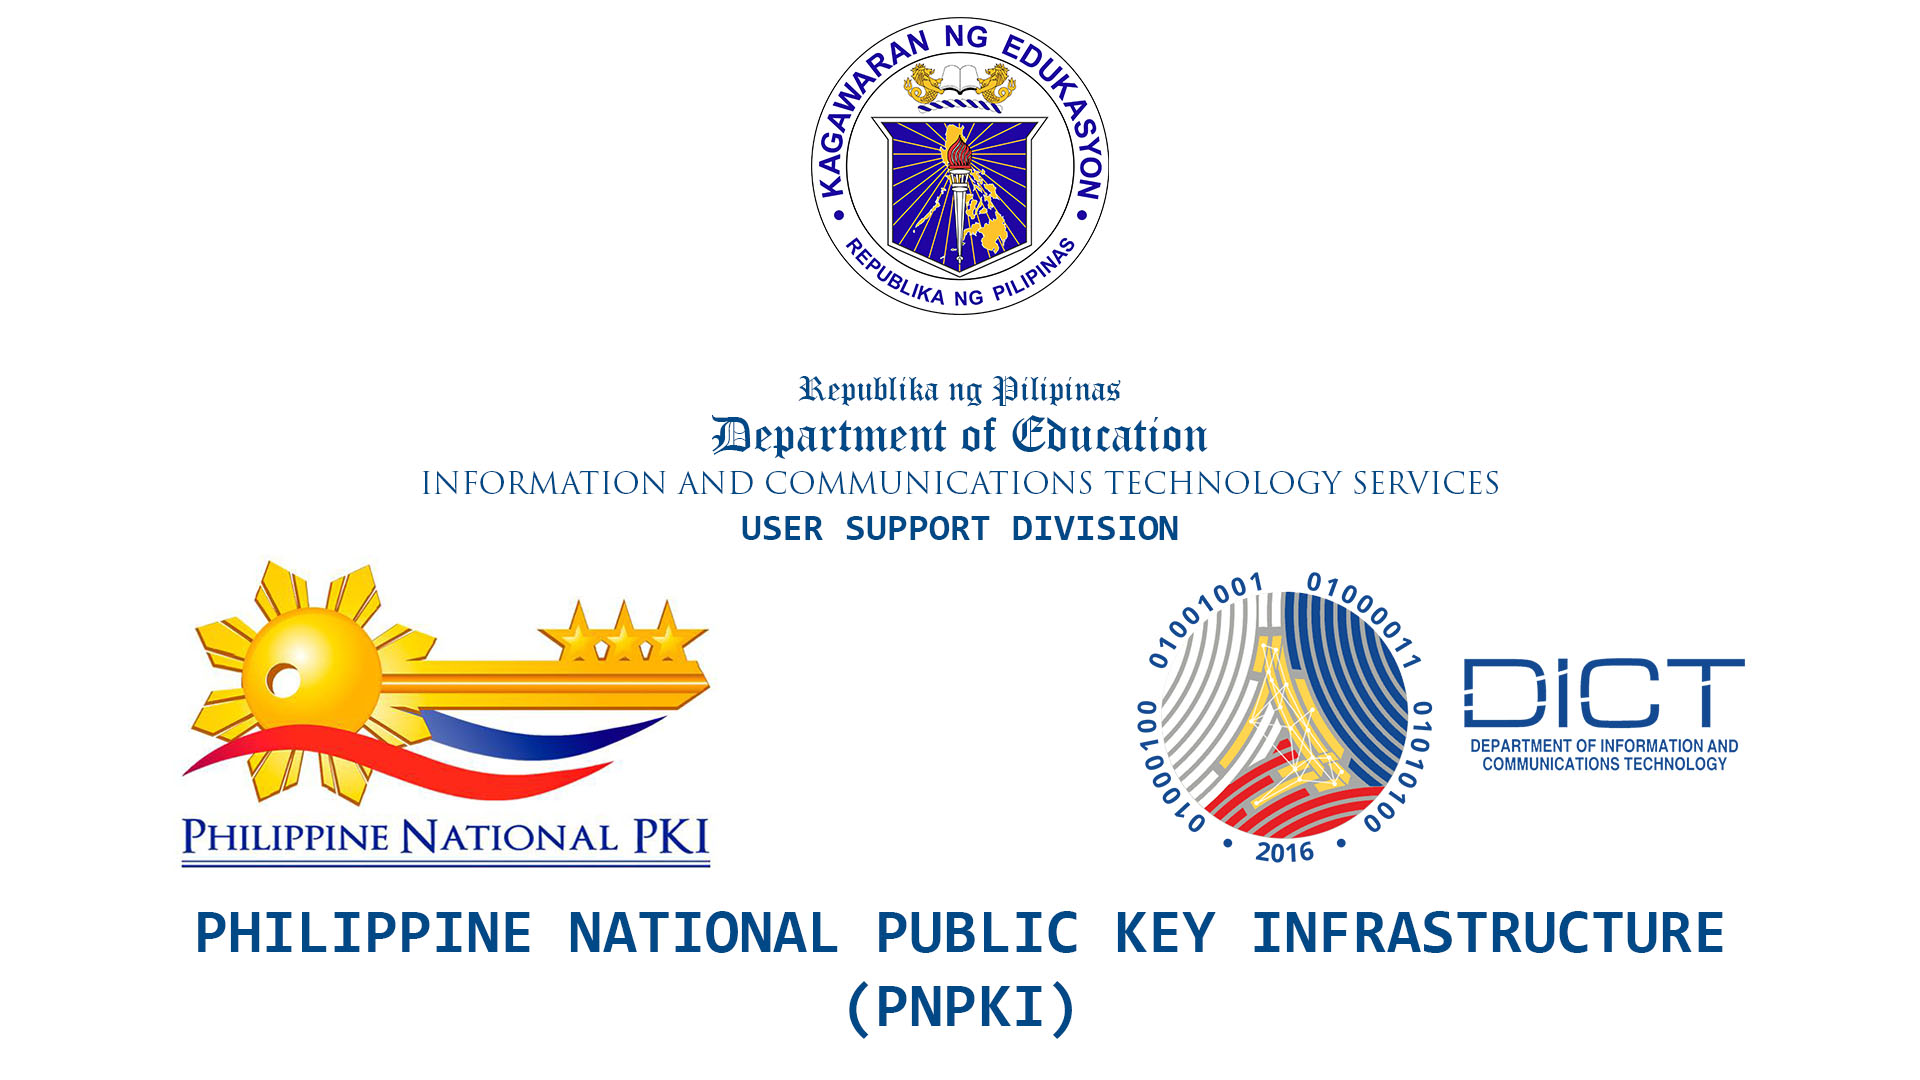 Iloilo 5th Congressional District - Facility for the Submission of the Application Requirement for the PNPKI Digital Certificate of DepEd Personnel in the Field Offices